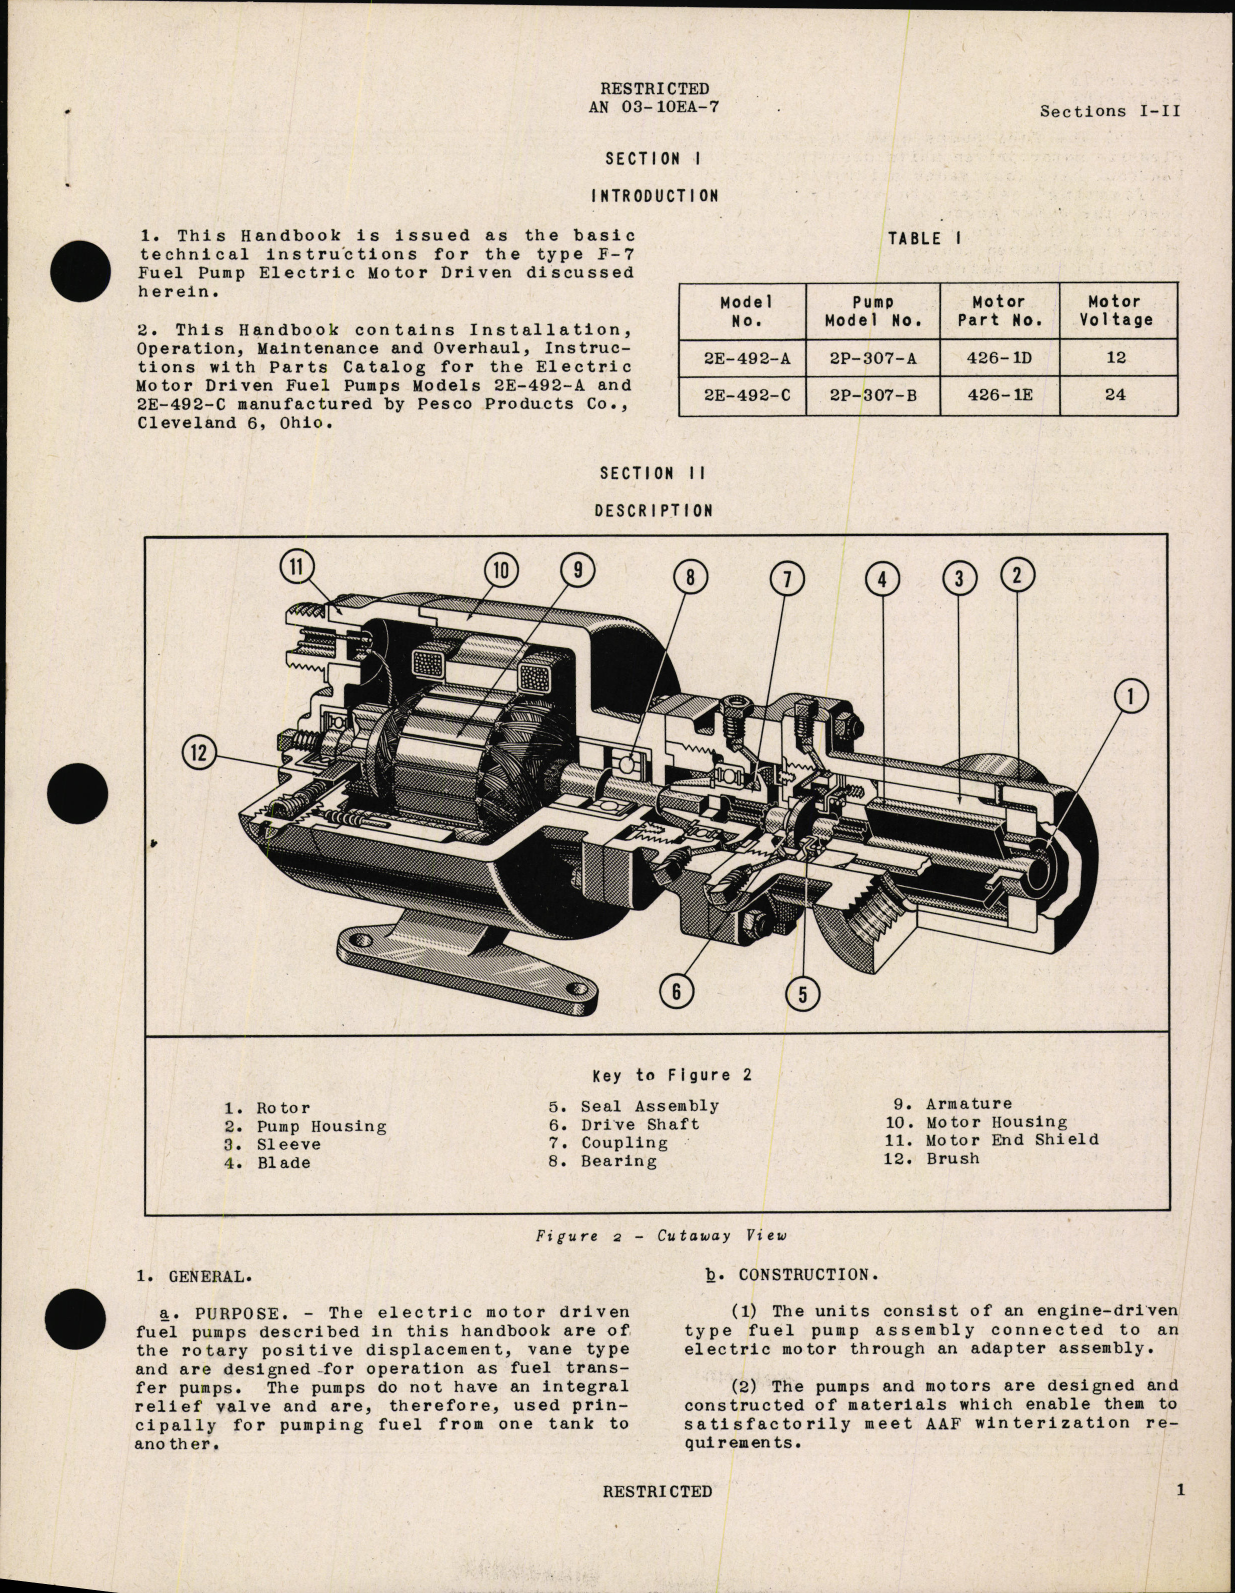 Sample page 5 from AirCorps Library document: Handbook of Instructions with Parts Catalog for Type F-7 Electric Motor Driven Fuel Pumps